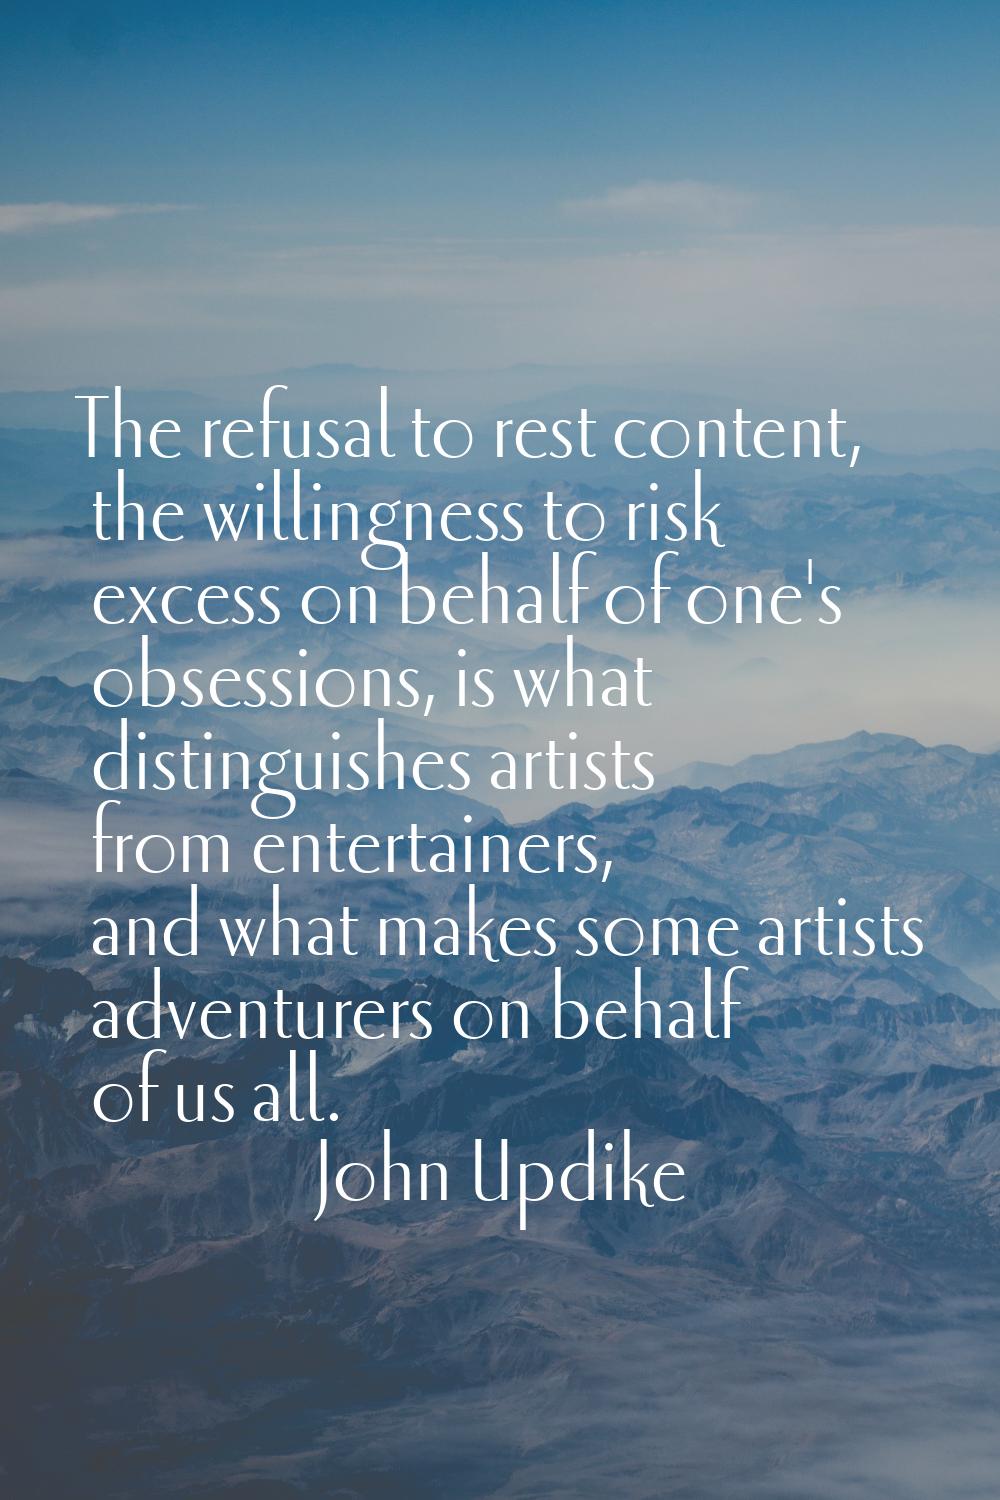 The refusal to rest content, the willingness to risk excess on behalf of one's obsessions, is what 